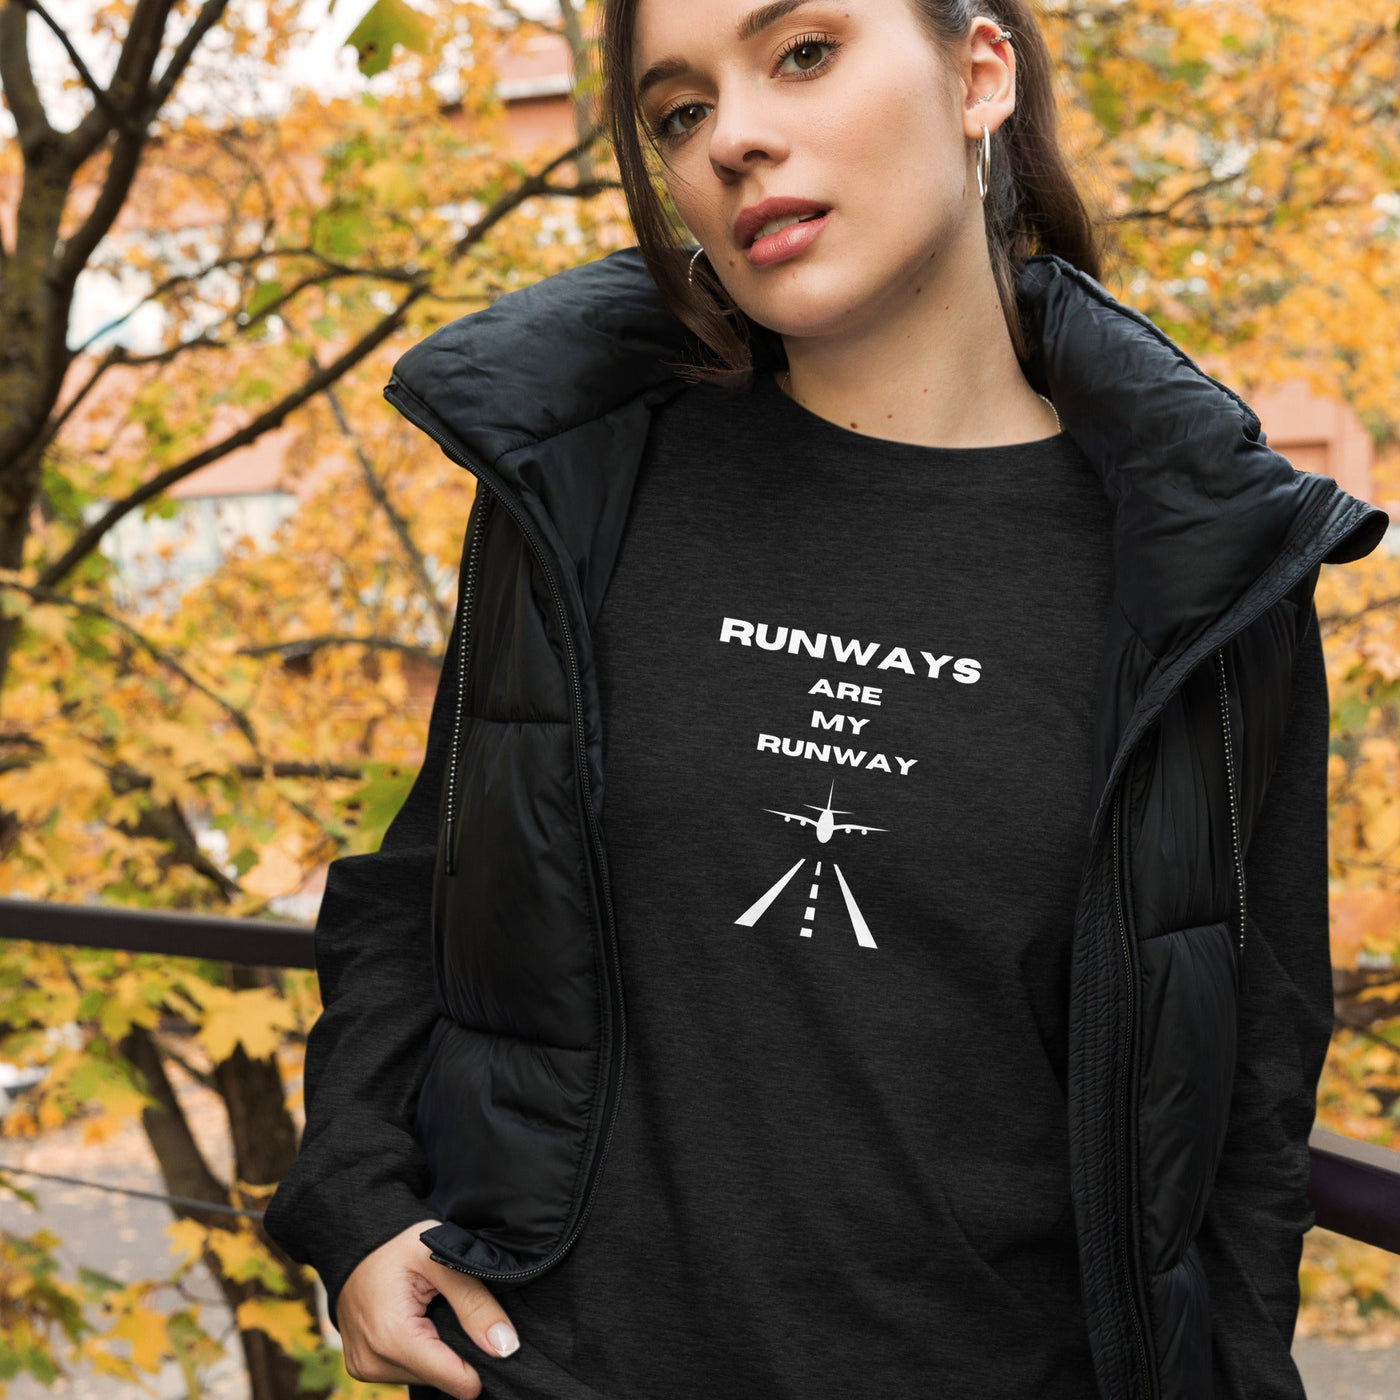 Get trendy with Unisex Long Sleeve Tee Runways are my Runway - Long-sleeve T-shirt available at SWCH Store. Grab yours for £25 today!